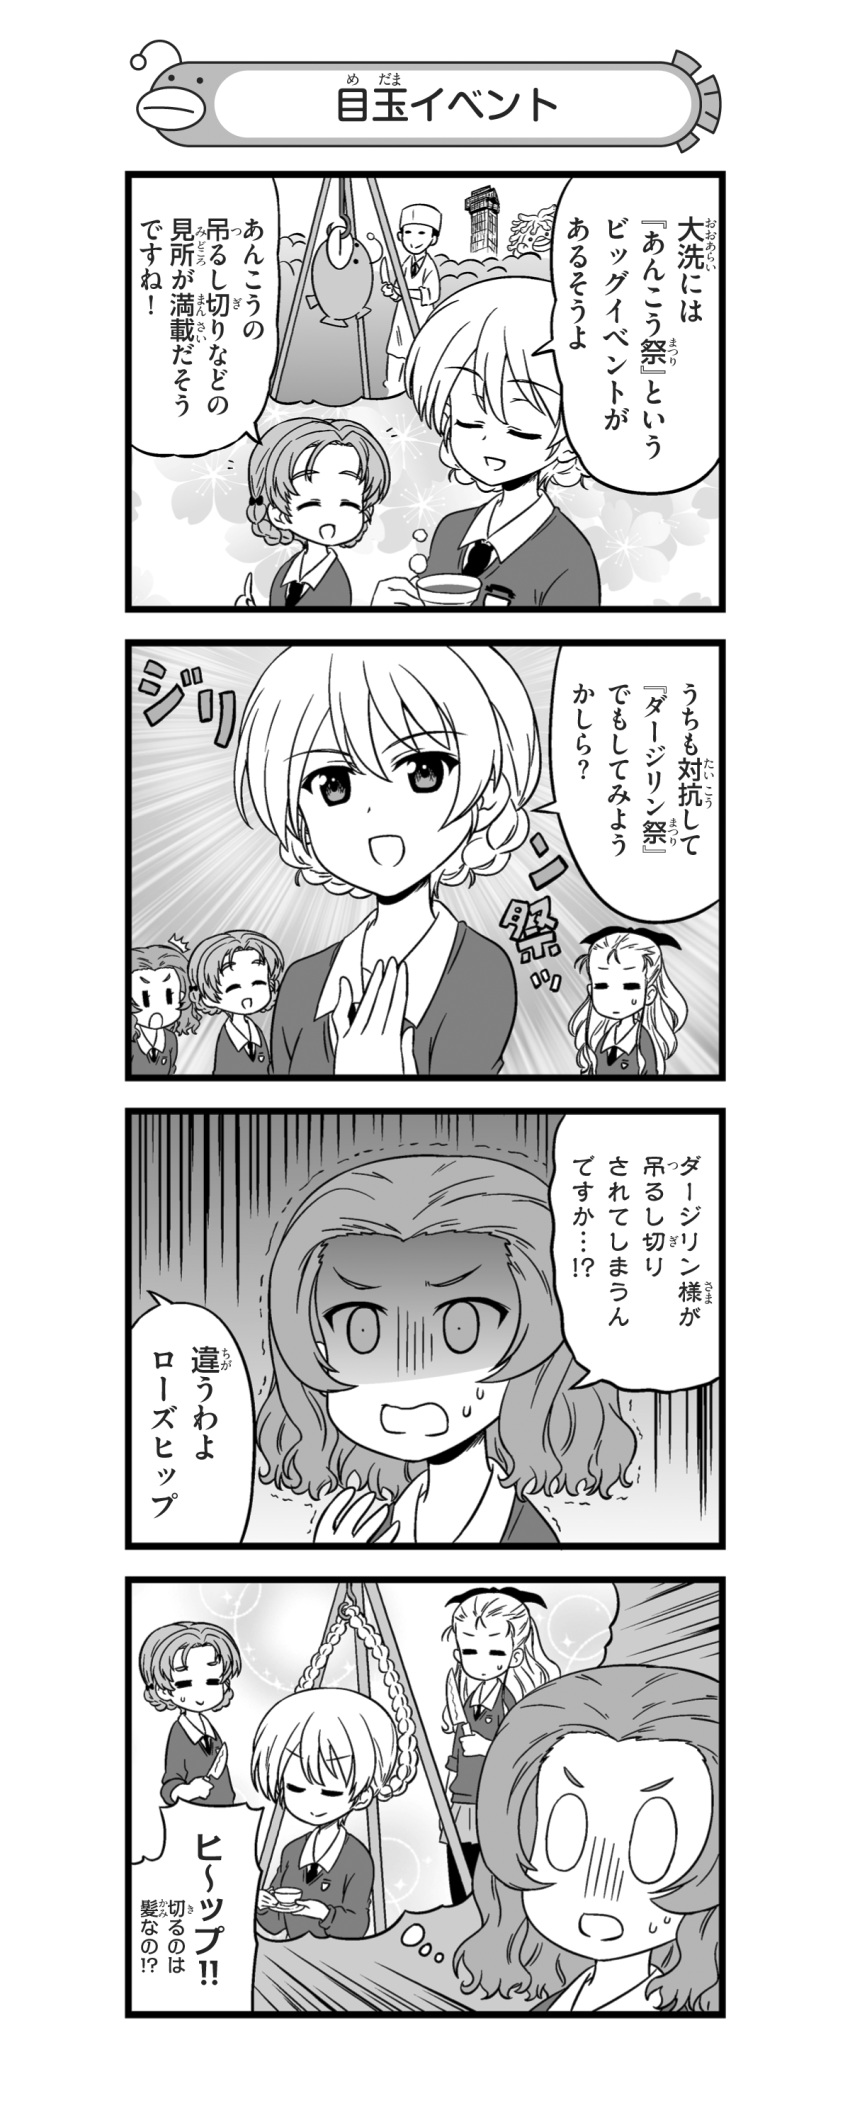 0_0 1boy 4girls 4koma :| =_= absurdres anglerfish araippe assam aura bangs bow braid chef chef_hat chef_uniform closed_eyes closed_mouth comic constricted_pupils crowd cup darjeeling dark_aura dress_shirt emblem eyebrows_visible_through_hair fish frown girls_und_panzer gloom_(expression) greyscale hair_bow hair_pulled_back hair_ribbon hair_undone hand_on_own_chest hat highres holding holding_cup holding_knife imagining knife light_rays long_hair long_sleeves looking_at_another mascot miniskirt monochrome multiple_girls nanashiro_gorou necktie notice_lines official_art ooarai_marine_tower open_mouth orange_pekoe pantyhose parted_bangs pdf_available pleated_skirt pointing pointing_up ribbon rosehip school_uniform shirt short_hair skirt sleeves_rolled_up smile sparkle st._gloriana's_school_uniform standing steam sweatdrop sweater teacup thought_bubble tied_hair translated trembling twin_braids v-neck wing_collar